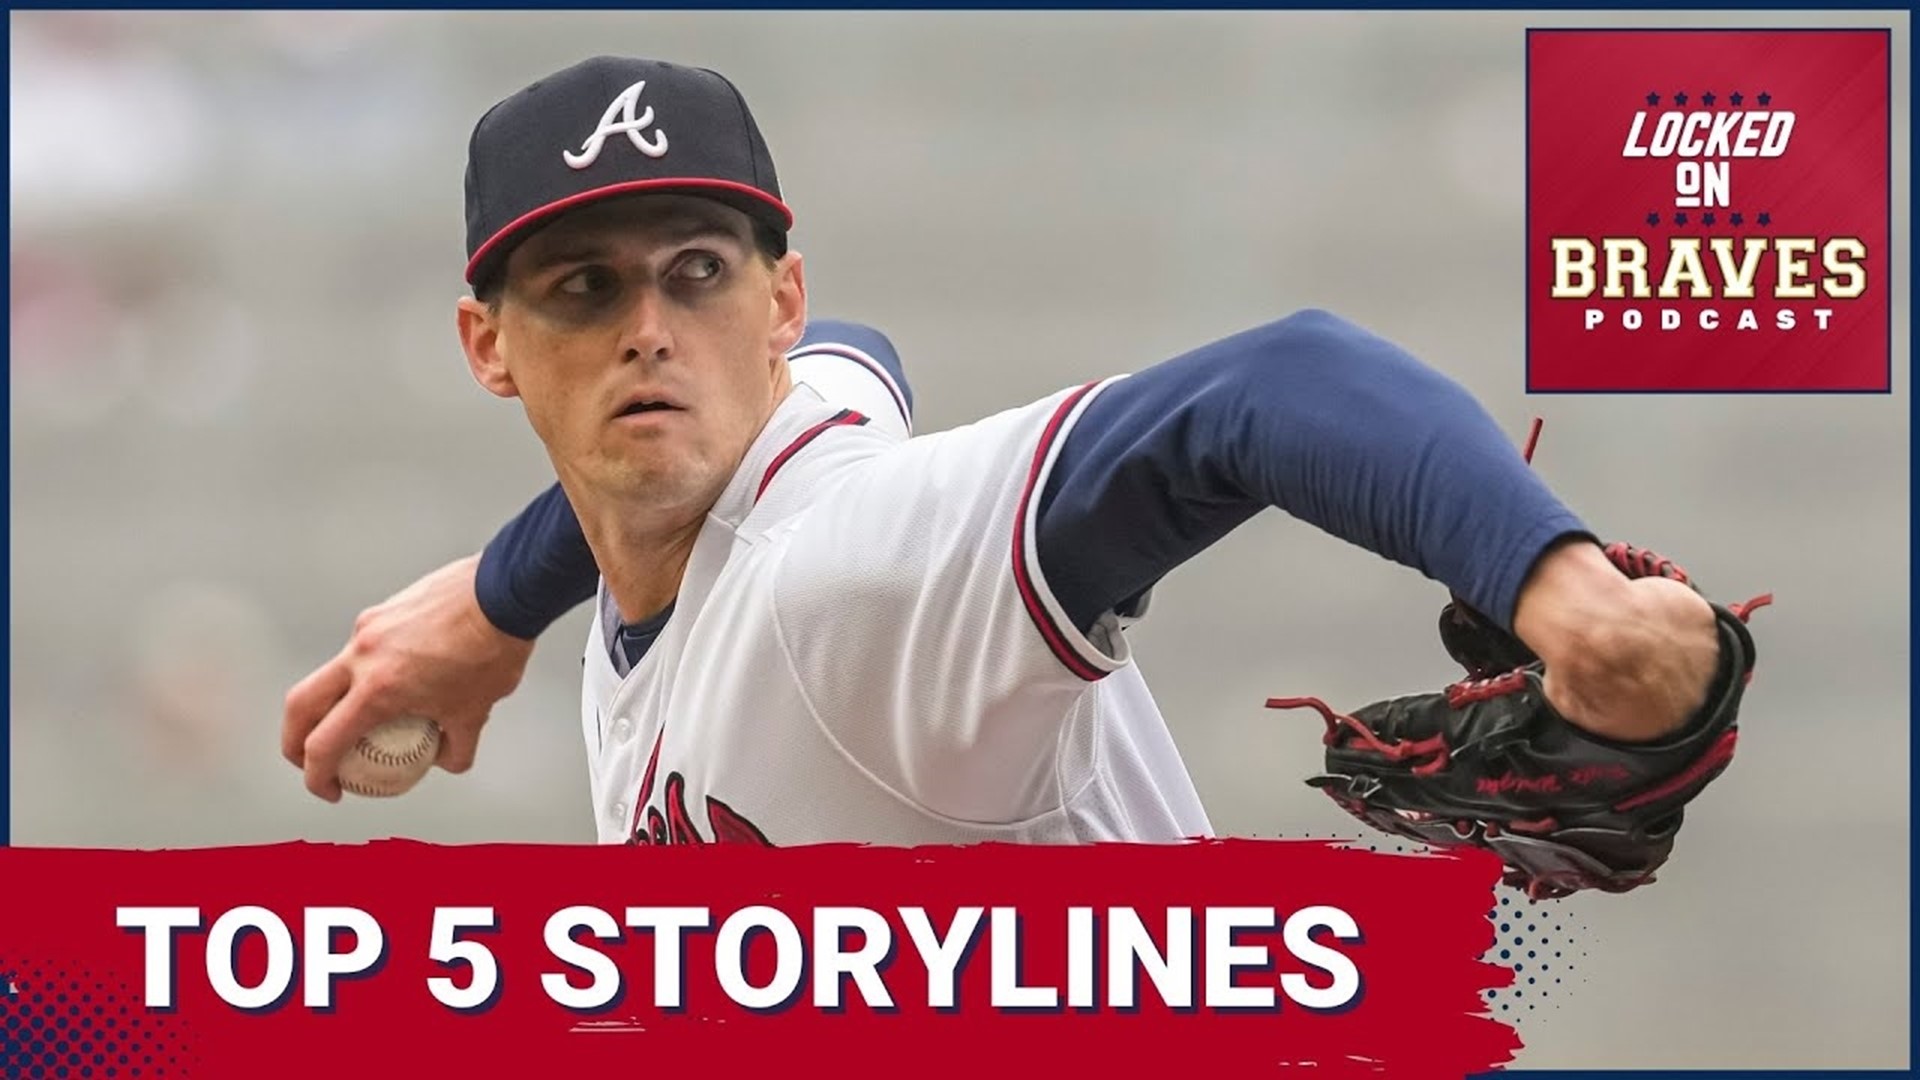 The Atlanta Braves have had a fantastic season that has led to many intriguing storylines in September.